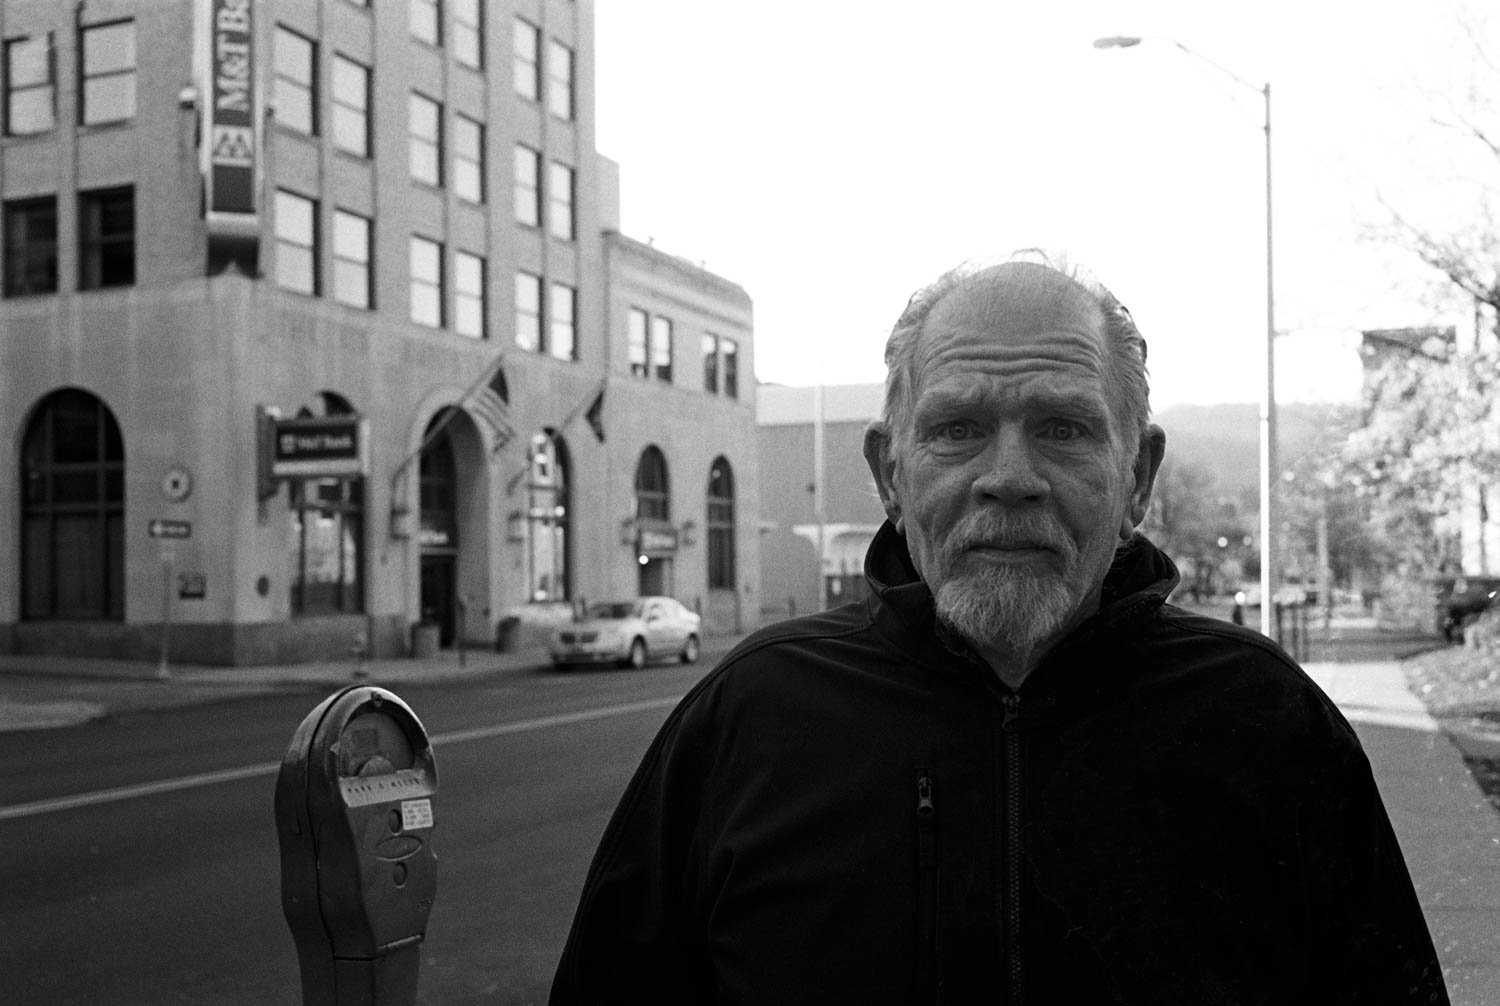 A black and white street portrait of a man standing on the sidewalk in Binghamton, NY